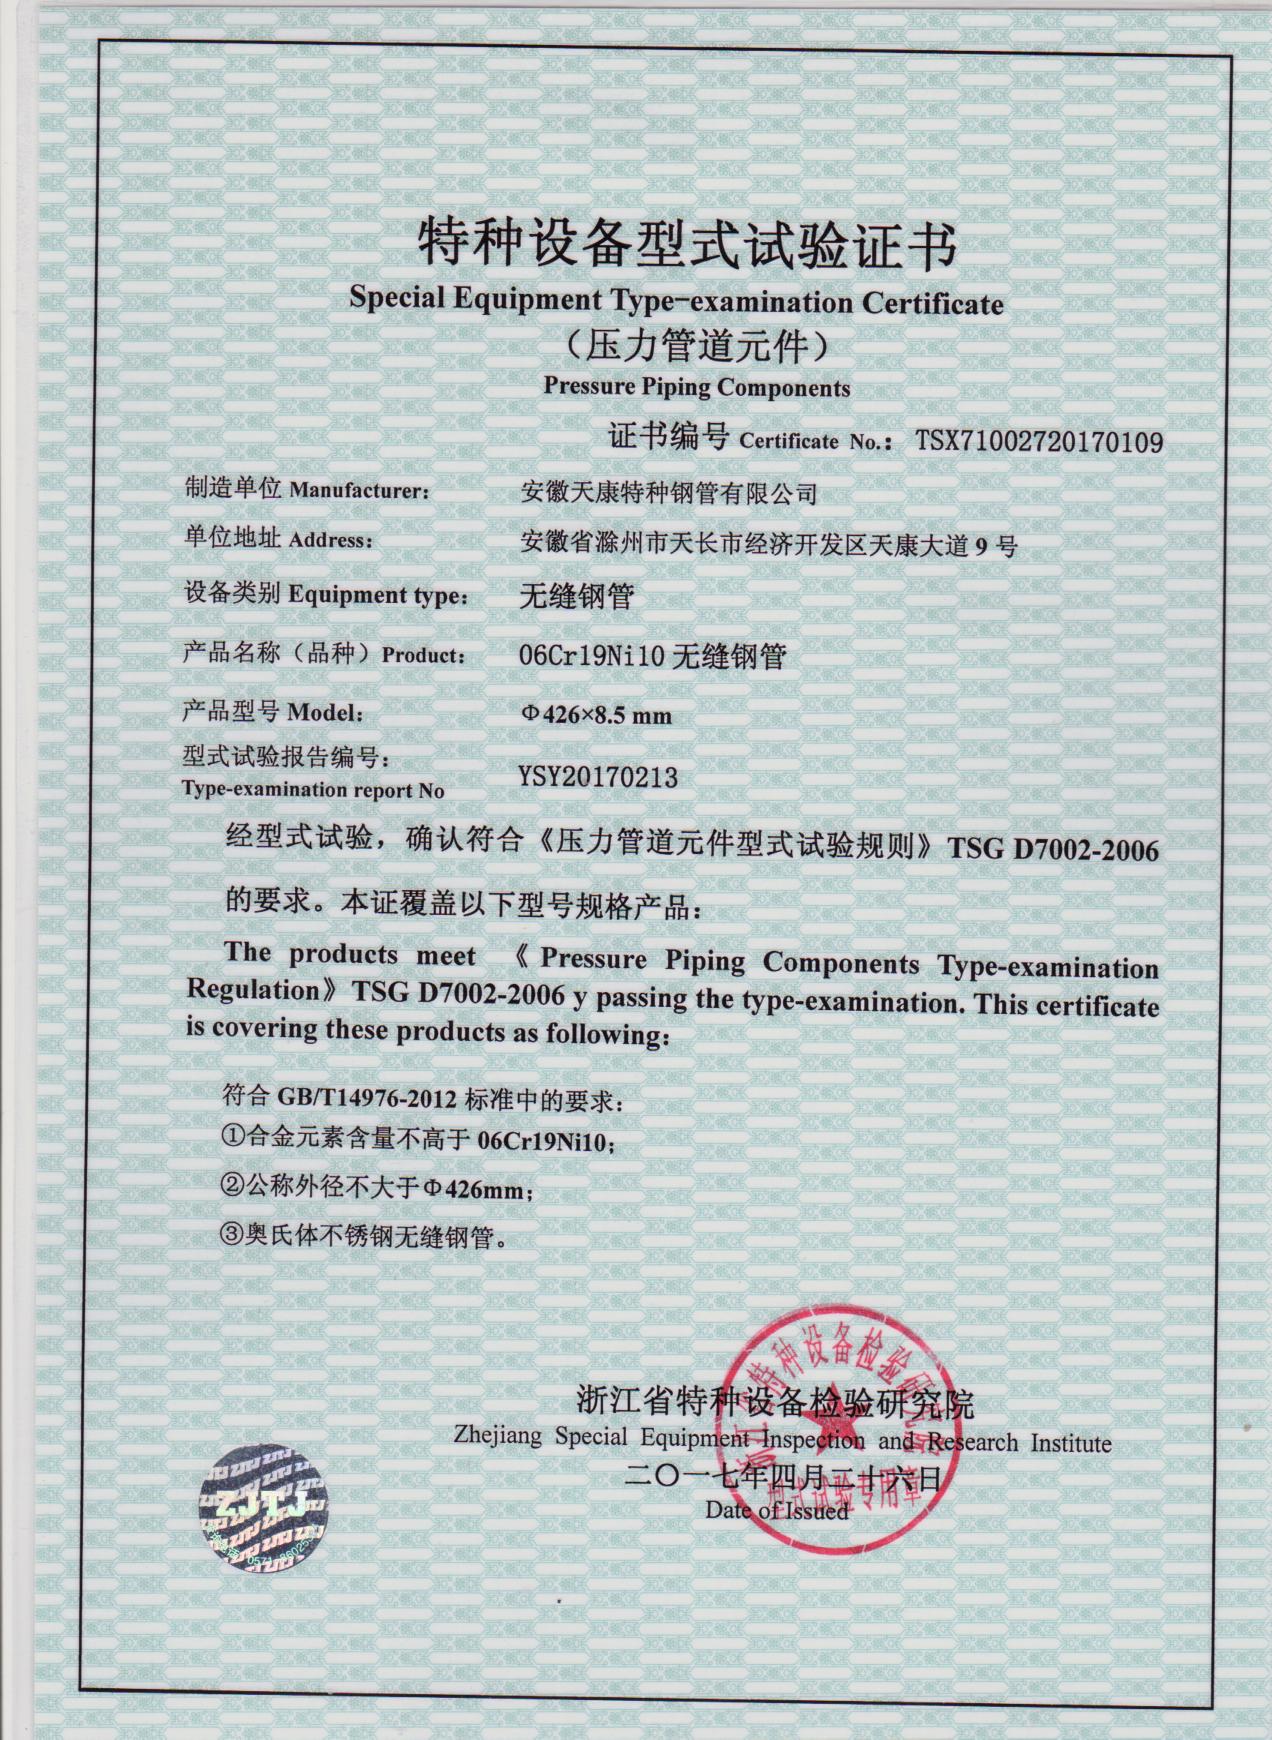 Special equipment type test certificate